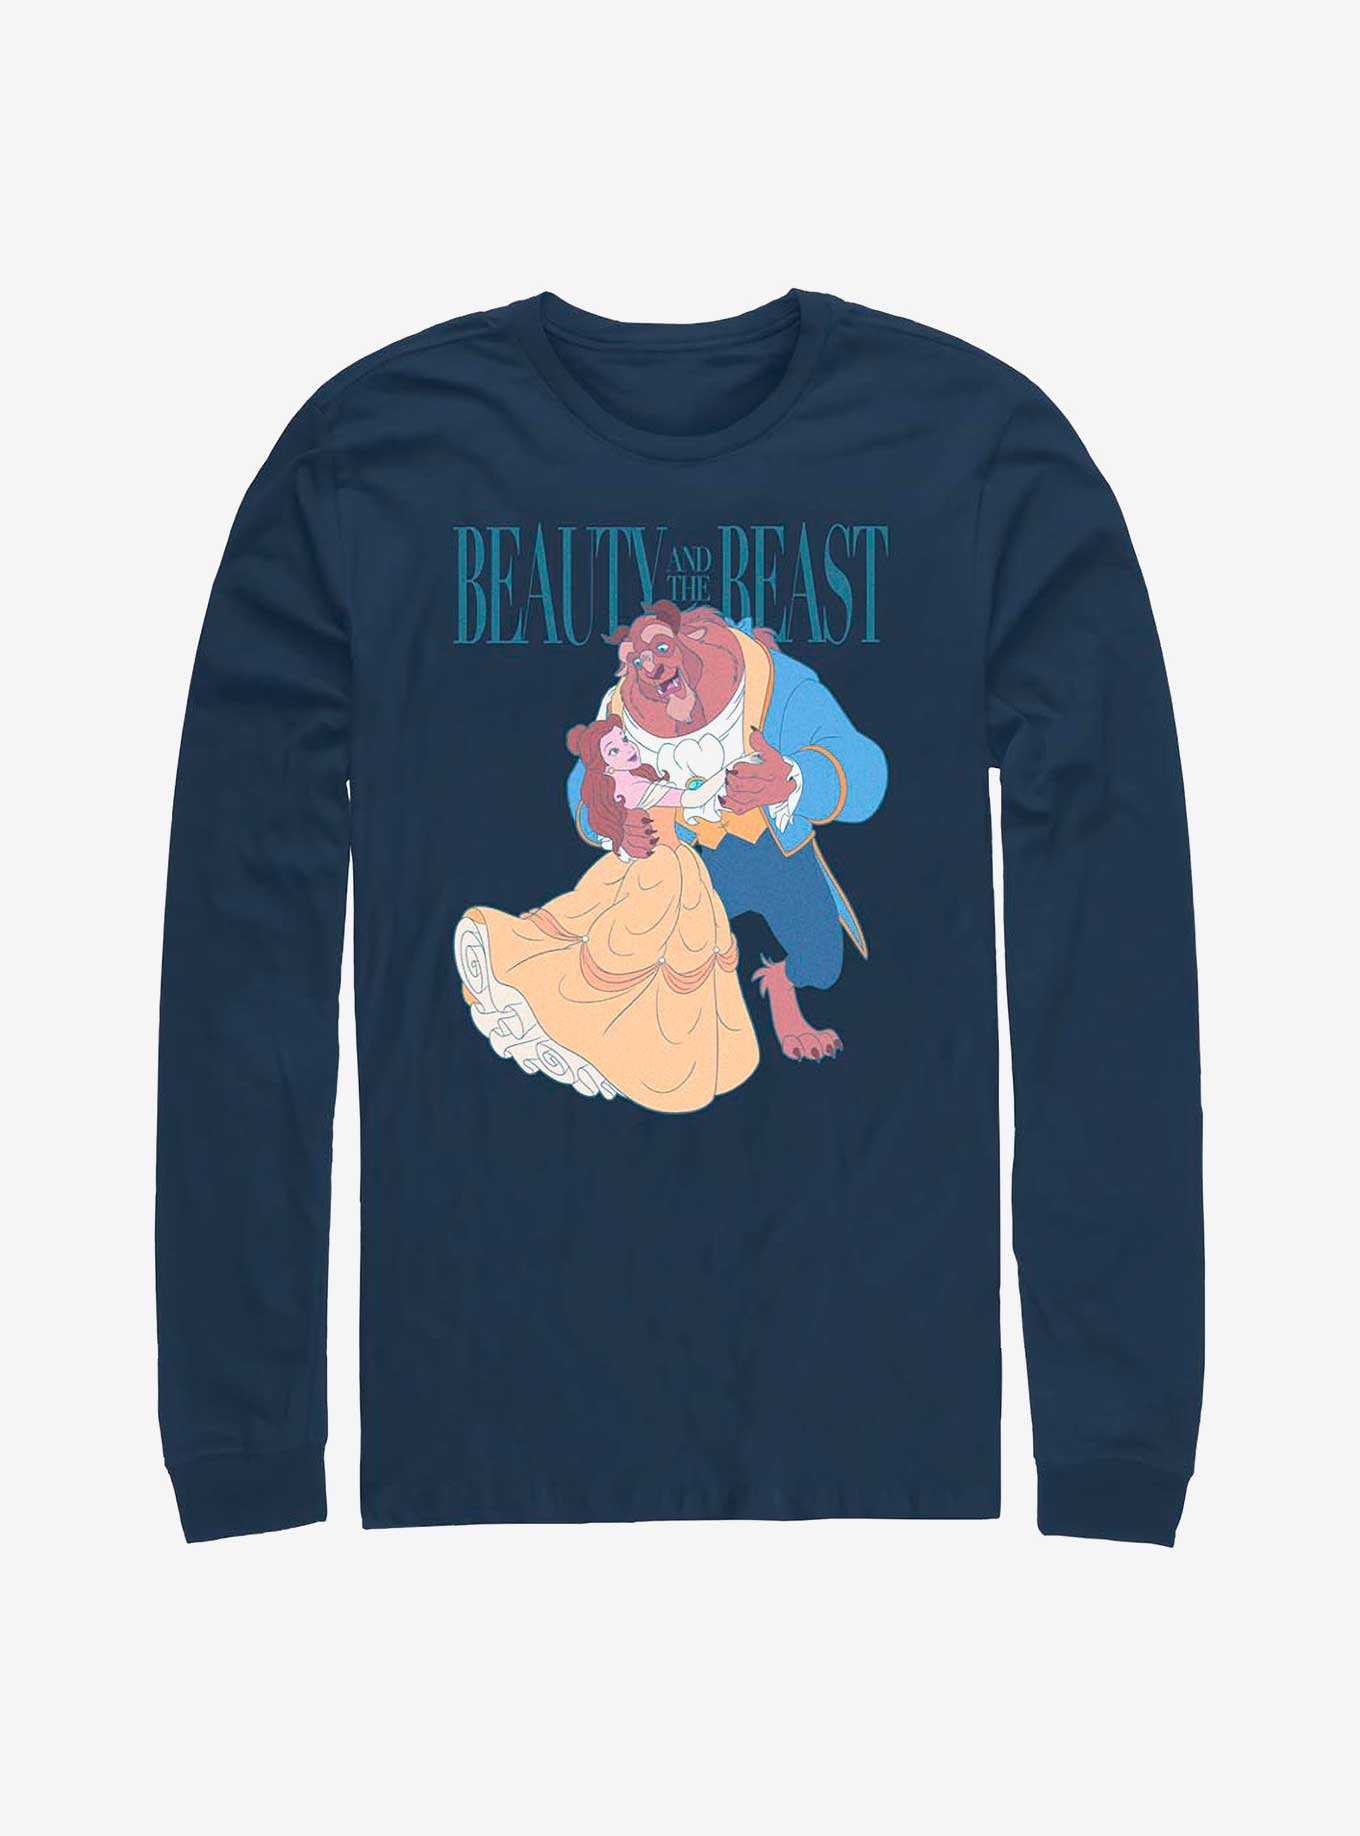 Disney Beauty And The Beast Vintage Dance Long-Sleeve T-Shirt, , hi-res